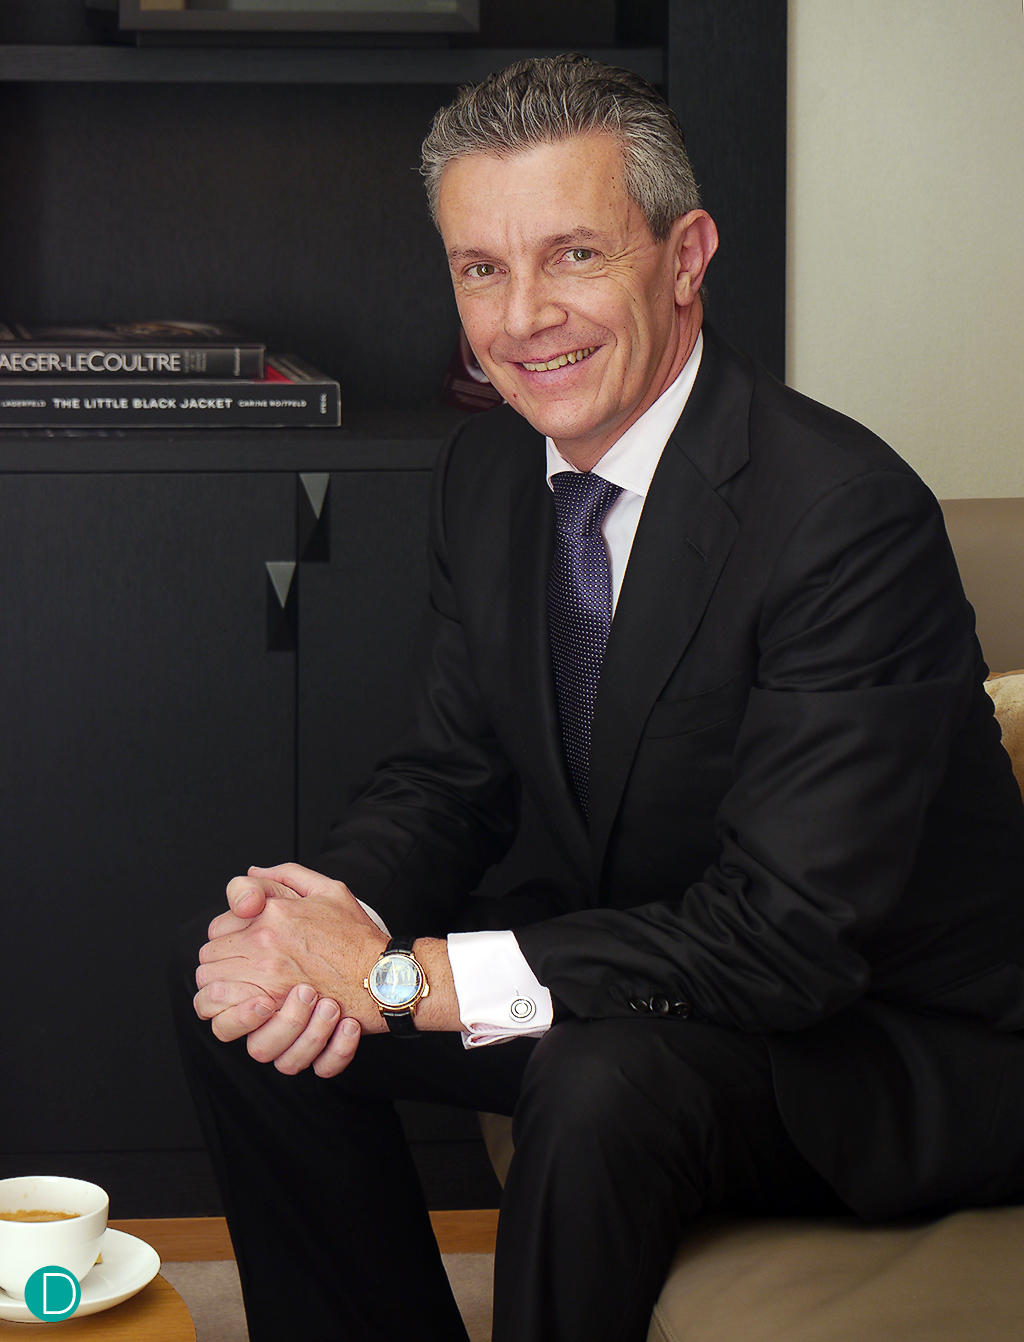 Daniel Riedo, CEO Jaeger LeCoultre. Photographed at the JLC Ion Orchard Boutique, March 2, 2016.